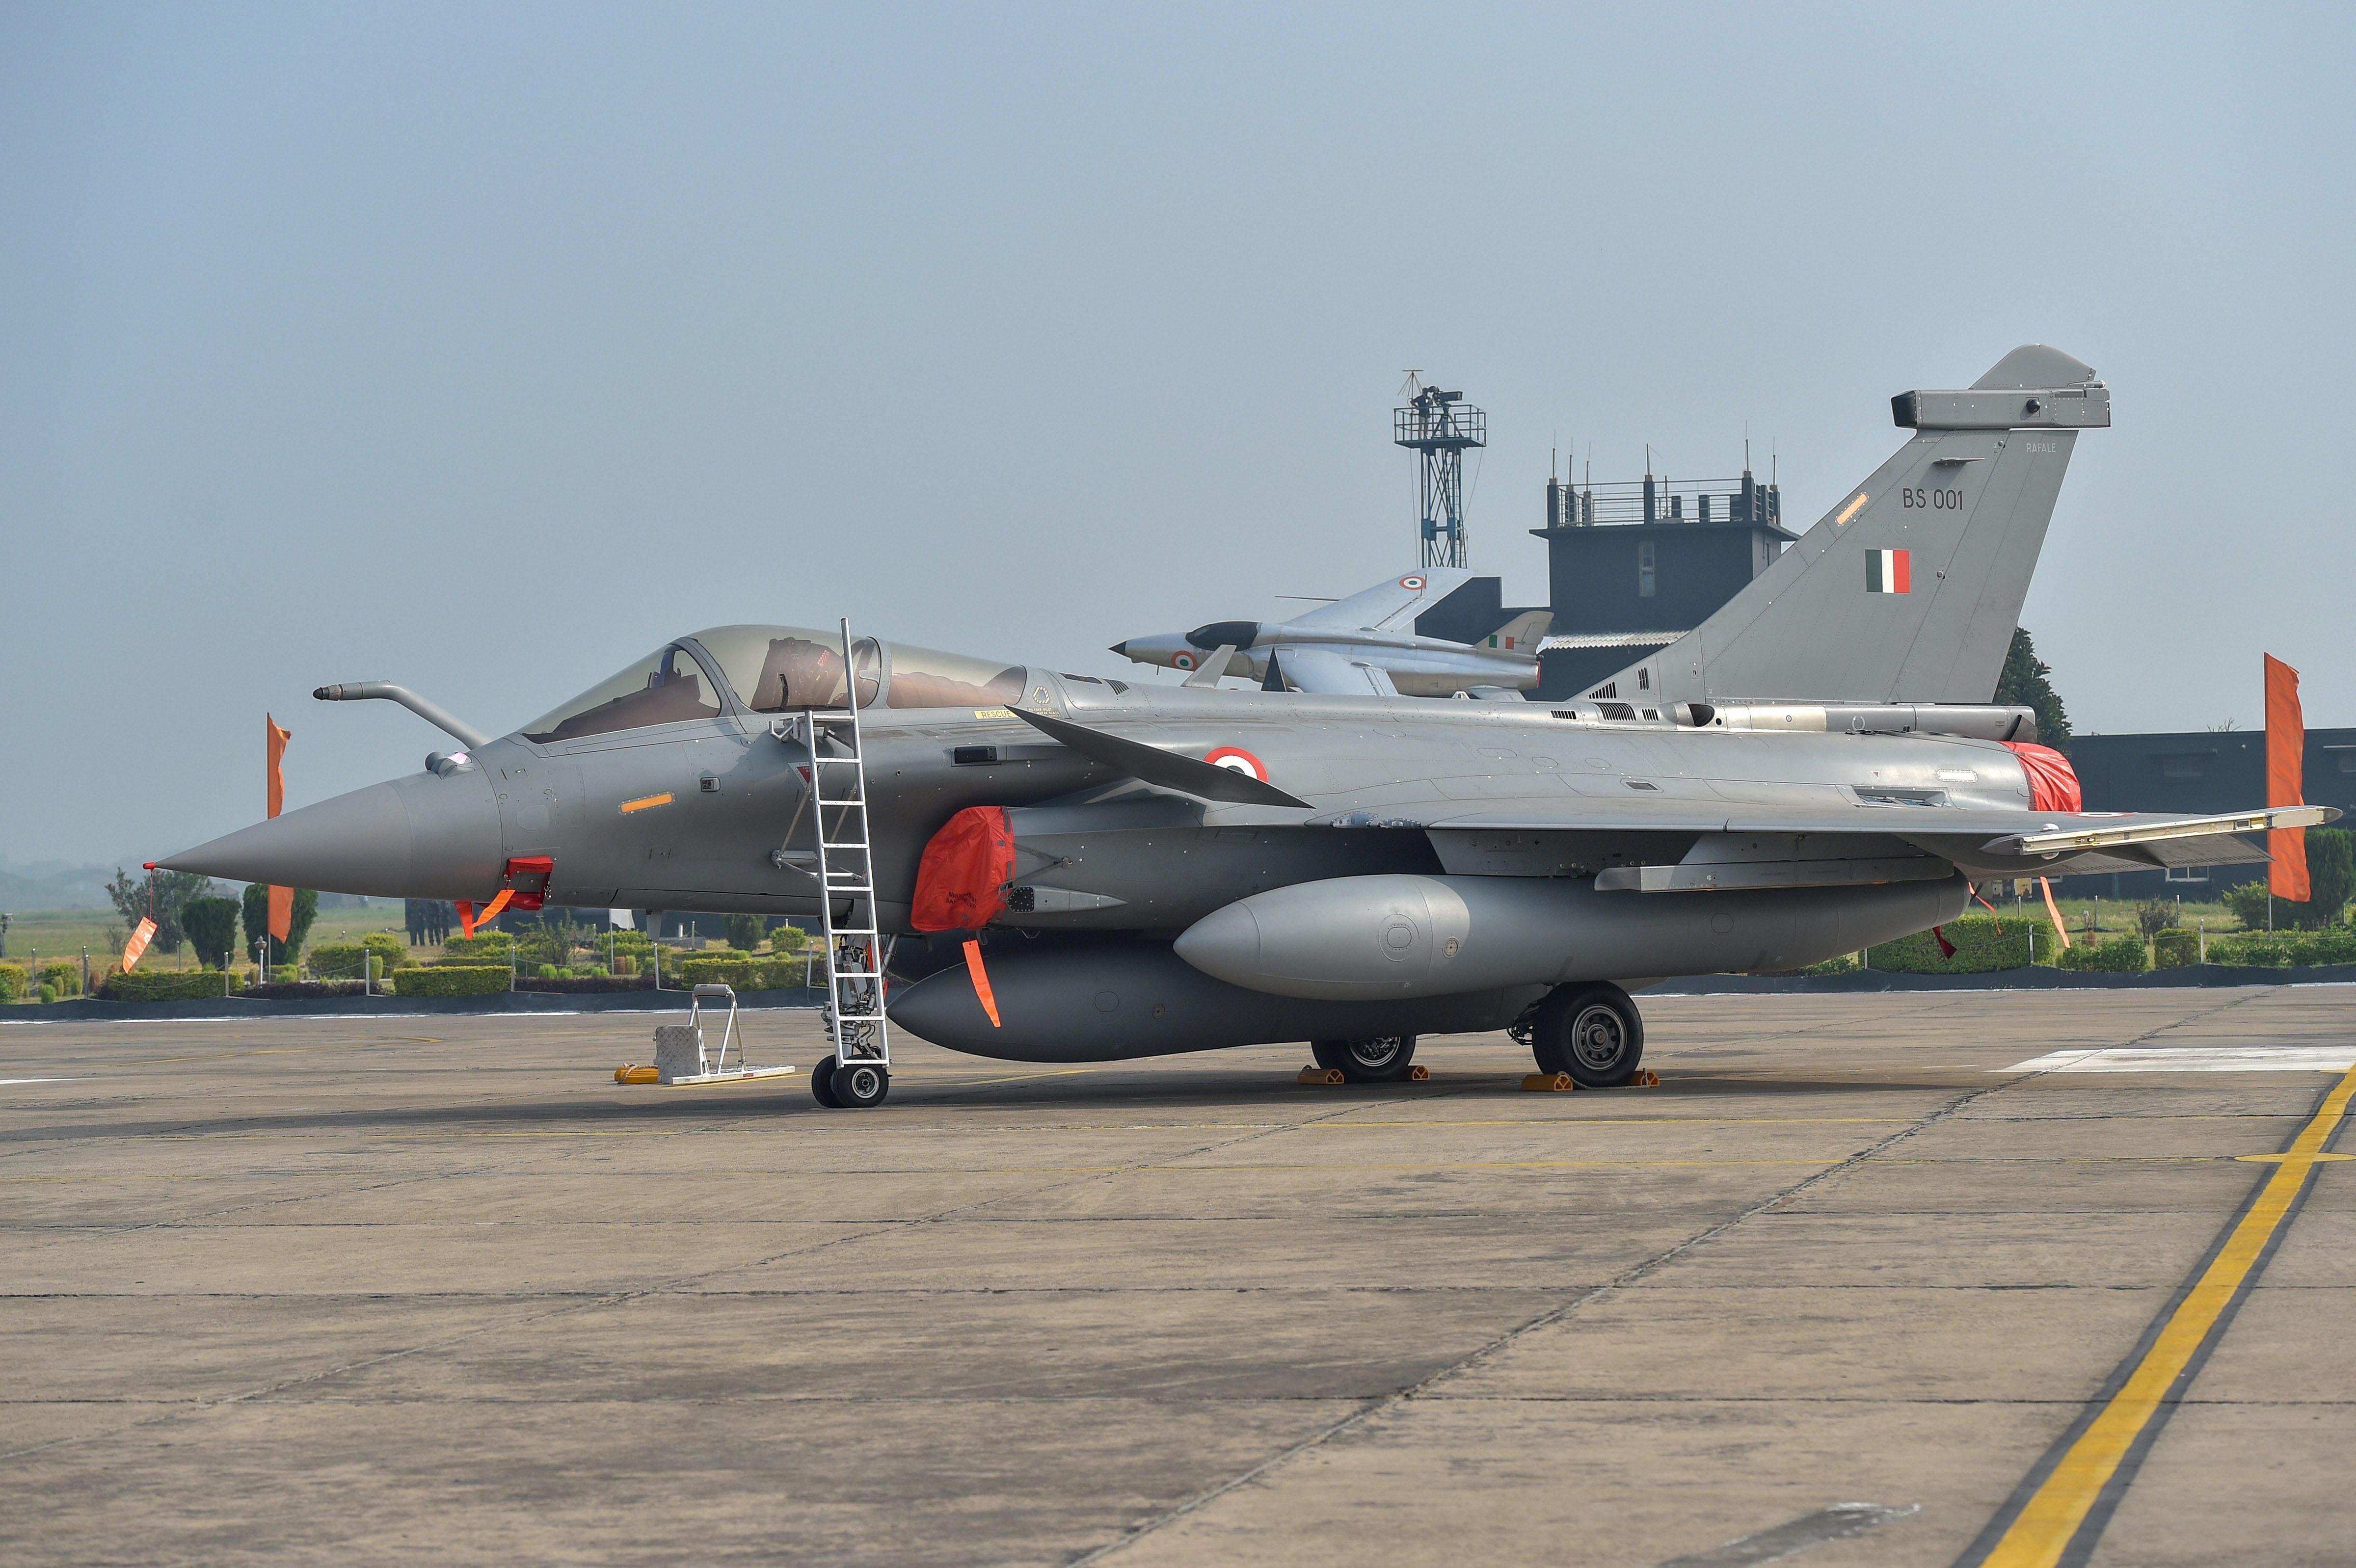 Rafale aircraft before being formally inducted into the Indian Air Force, at the airbase in Ambala. Credit: PTI